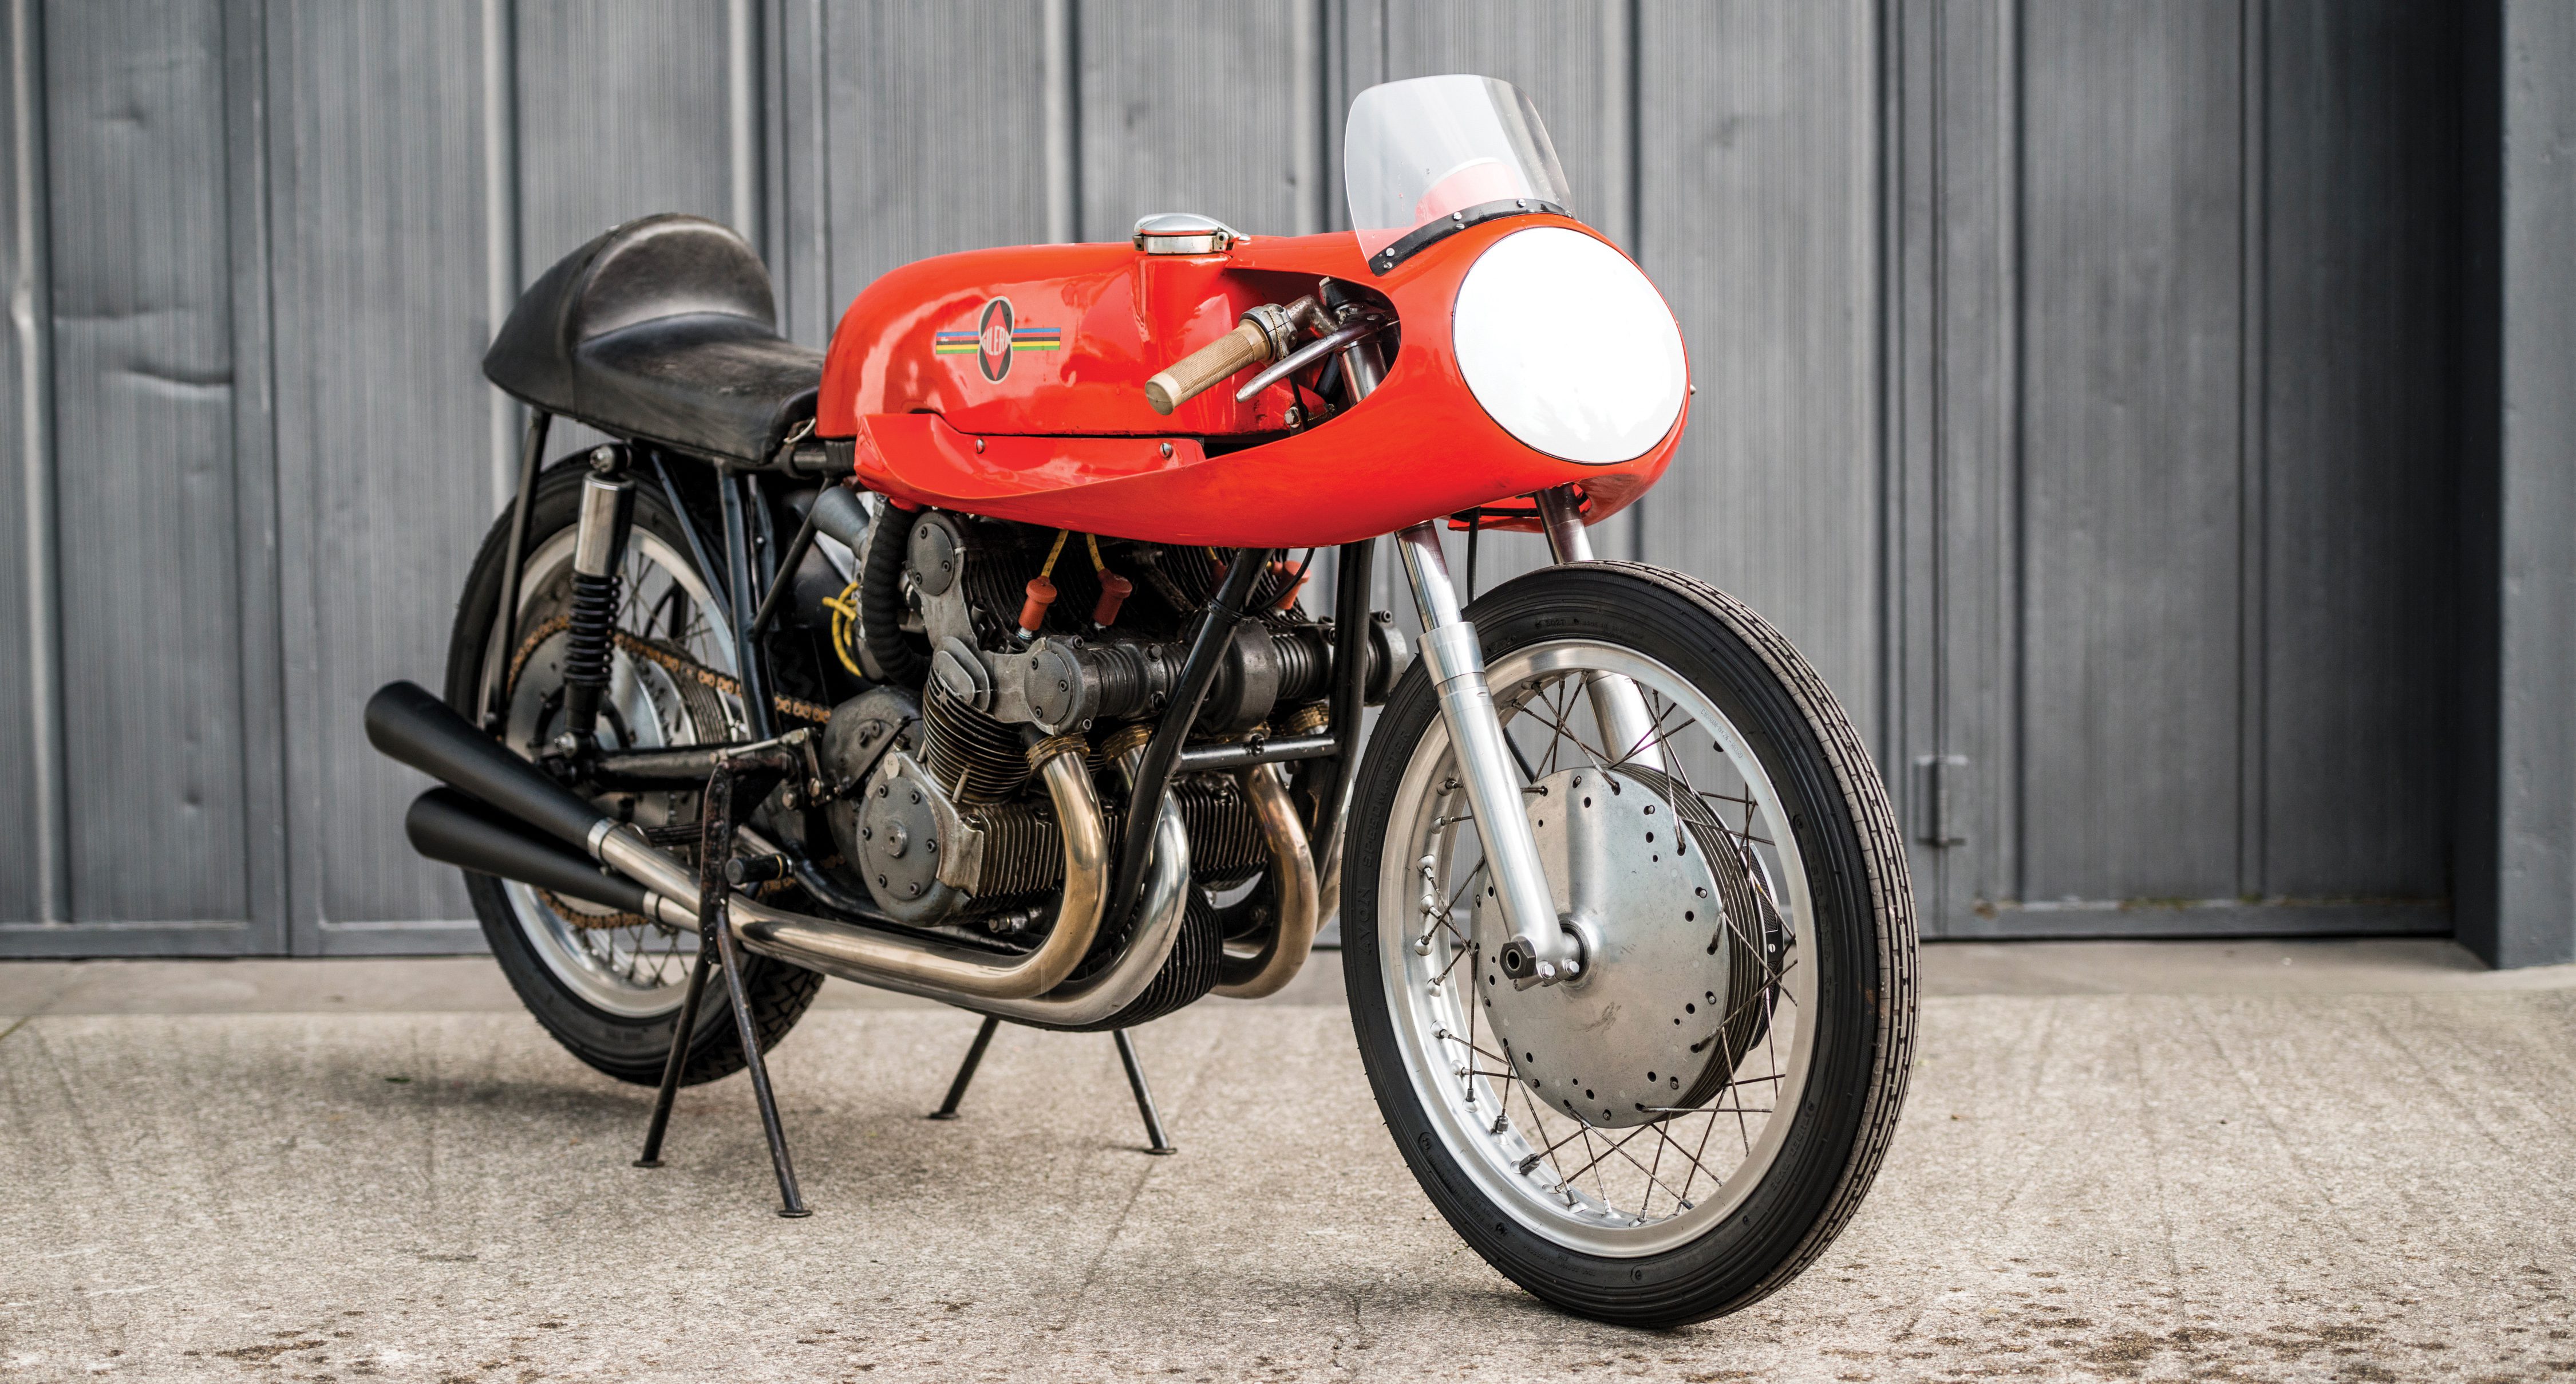 10 vintage motorcycles we want to own